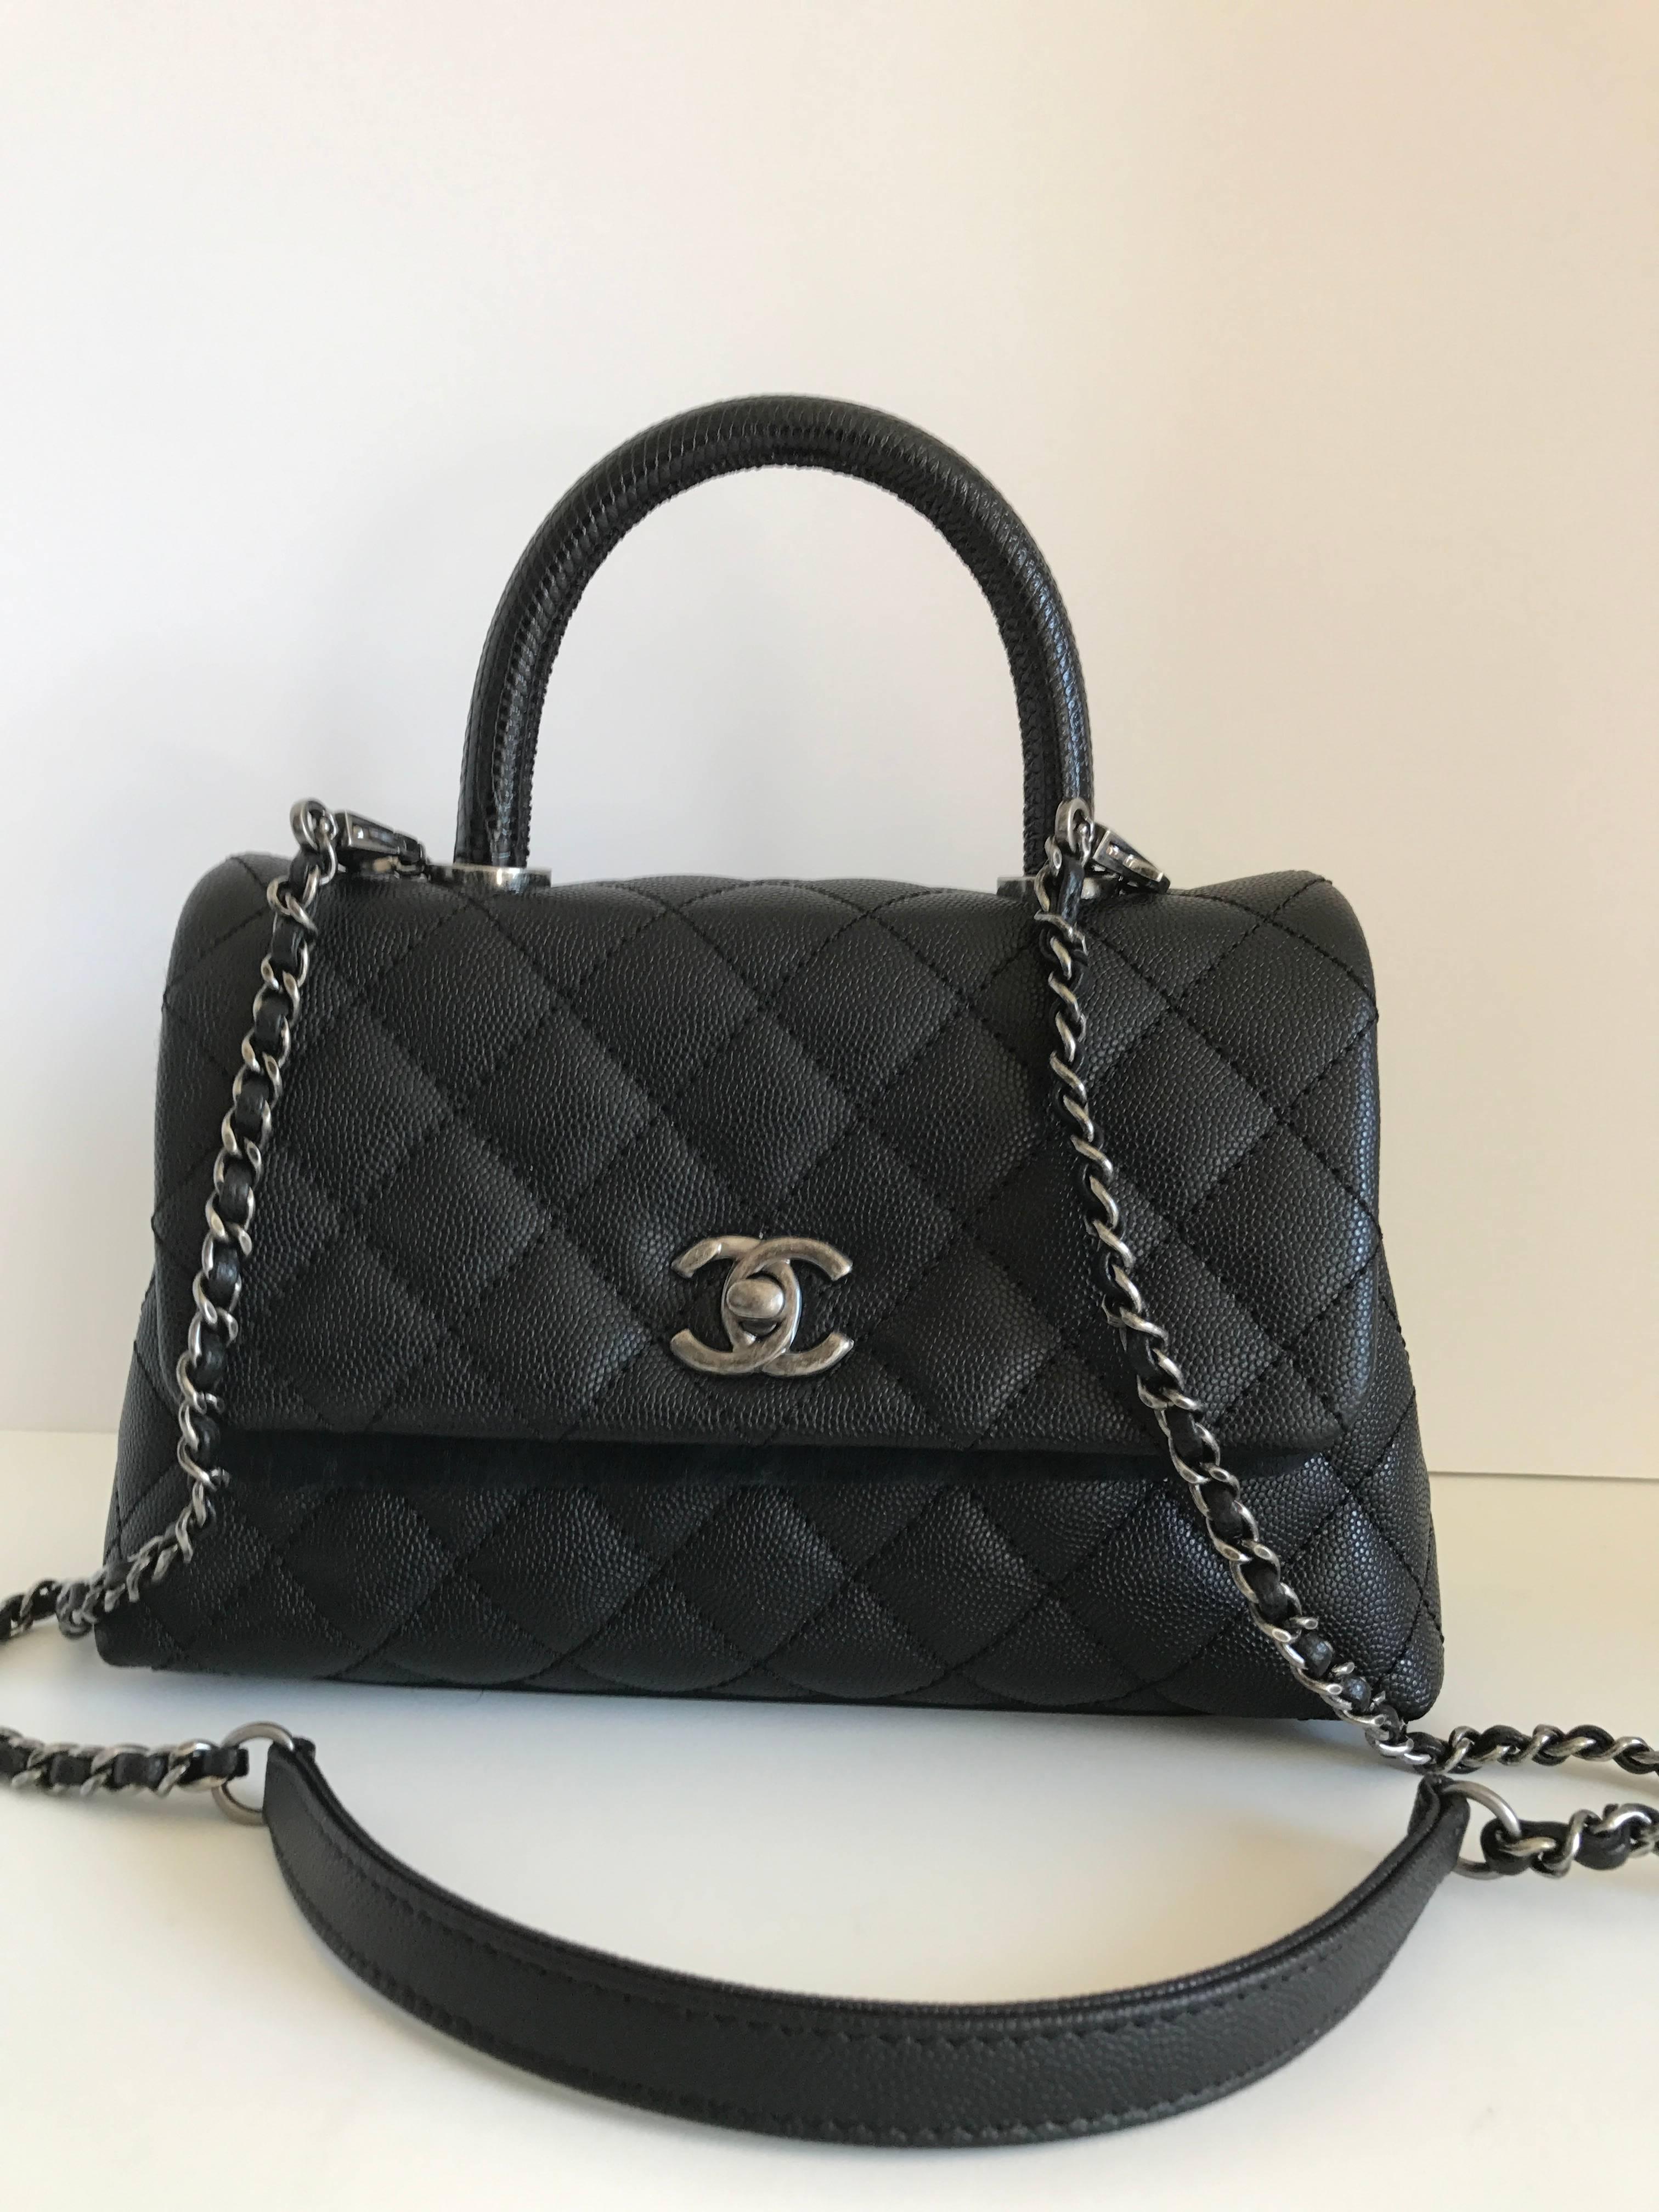 The Chanel Coco Handle Bag
Soldout in stores
Limited Edition Caviar with Lizard Handle
Caviar leather
Mini Size
Dimensions: 9